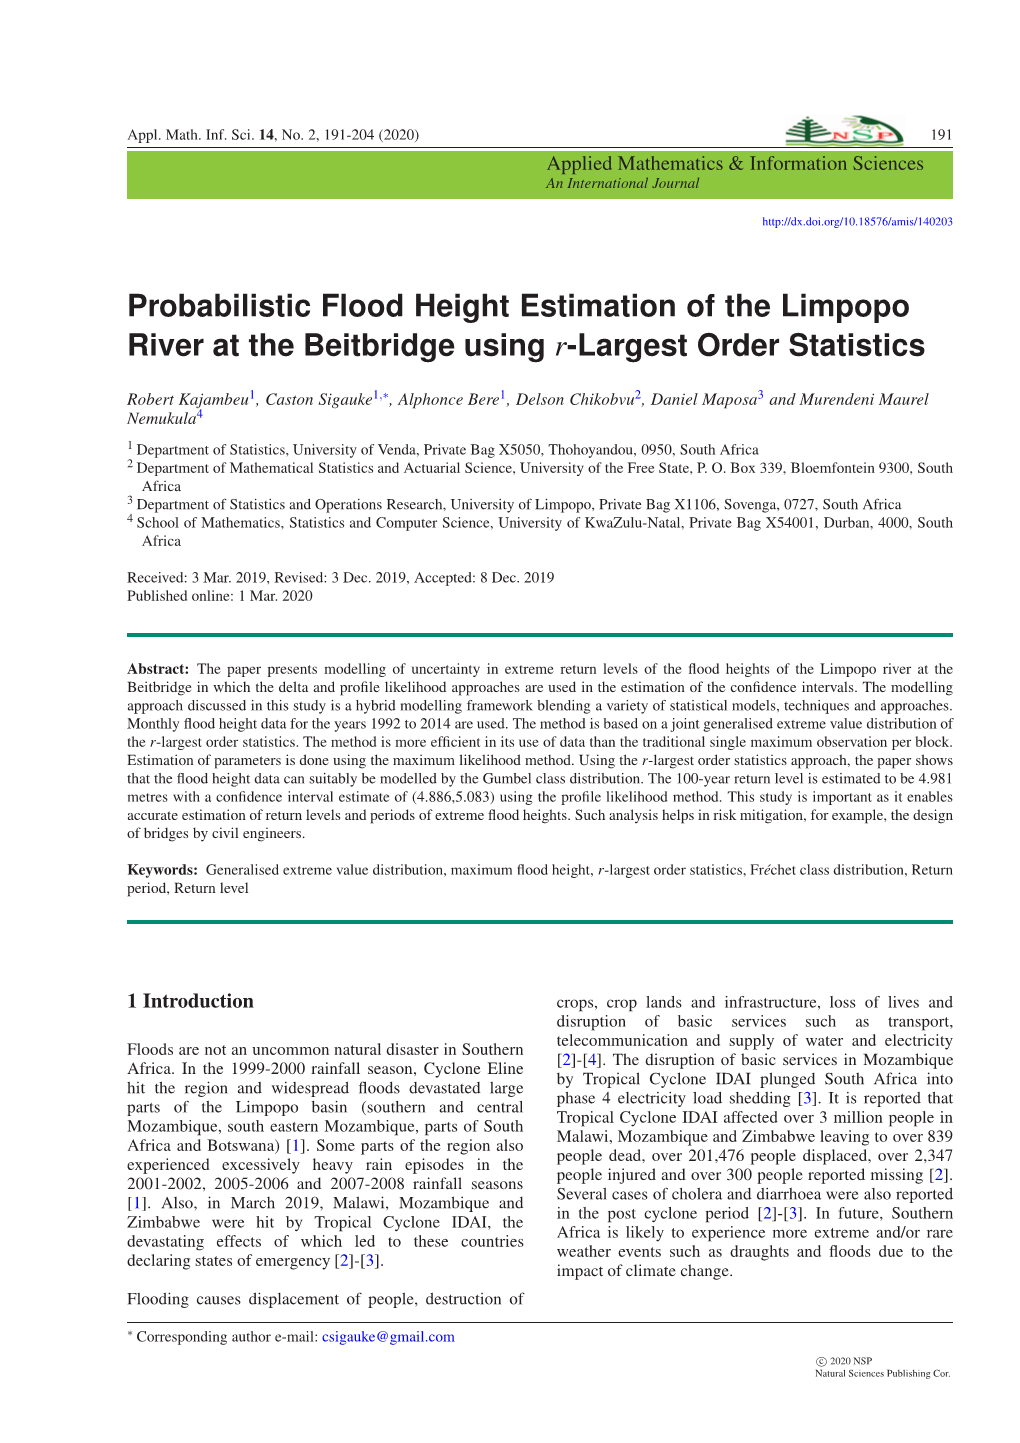 Probabilistic Flood Height Estimation of the Limpopo River at the Beitbridge Using R-Largest Order Statistics